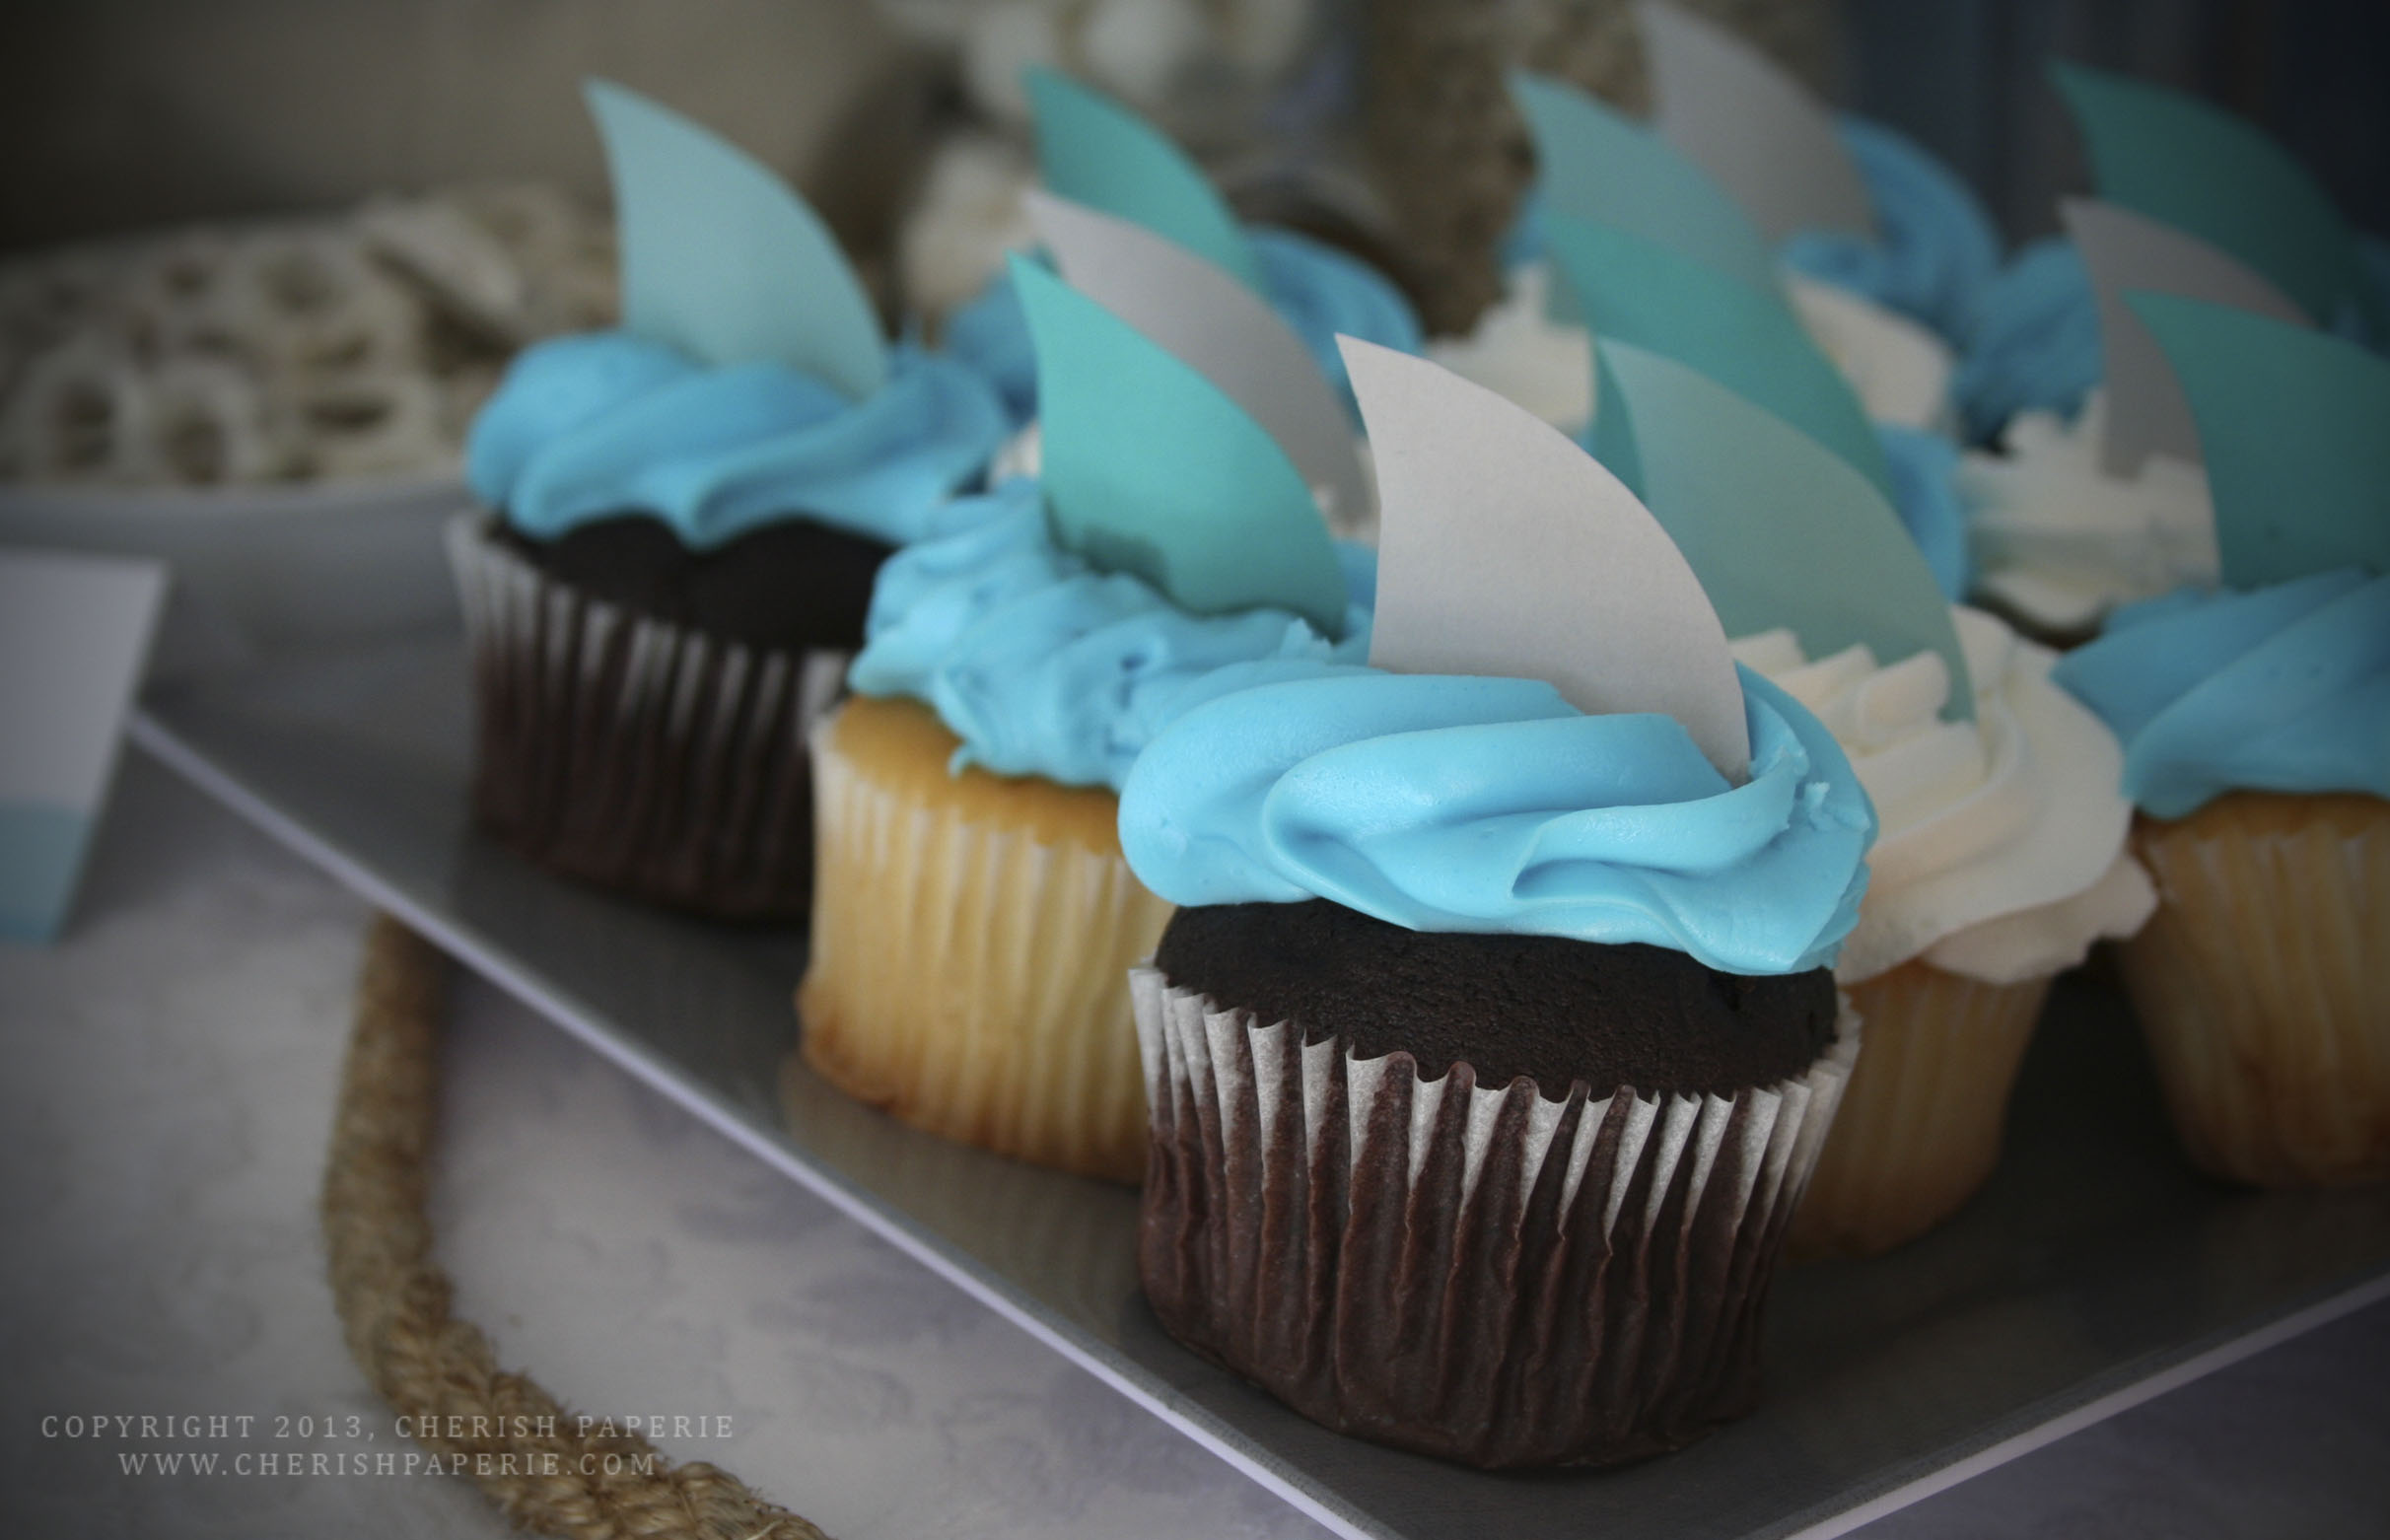 Baby Shower; Cherish Paperie; Ships Ahoy; Nautical shower; boys baby shower; shark-themed shower; blue and grey; blue events; grey events; grey wedding inspiration